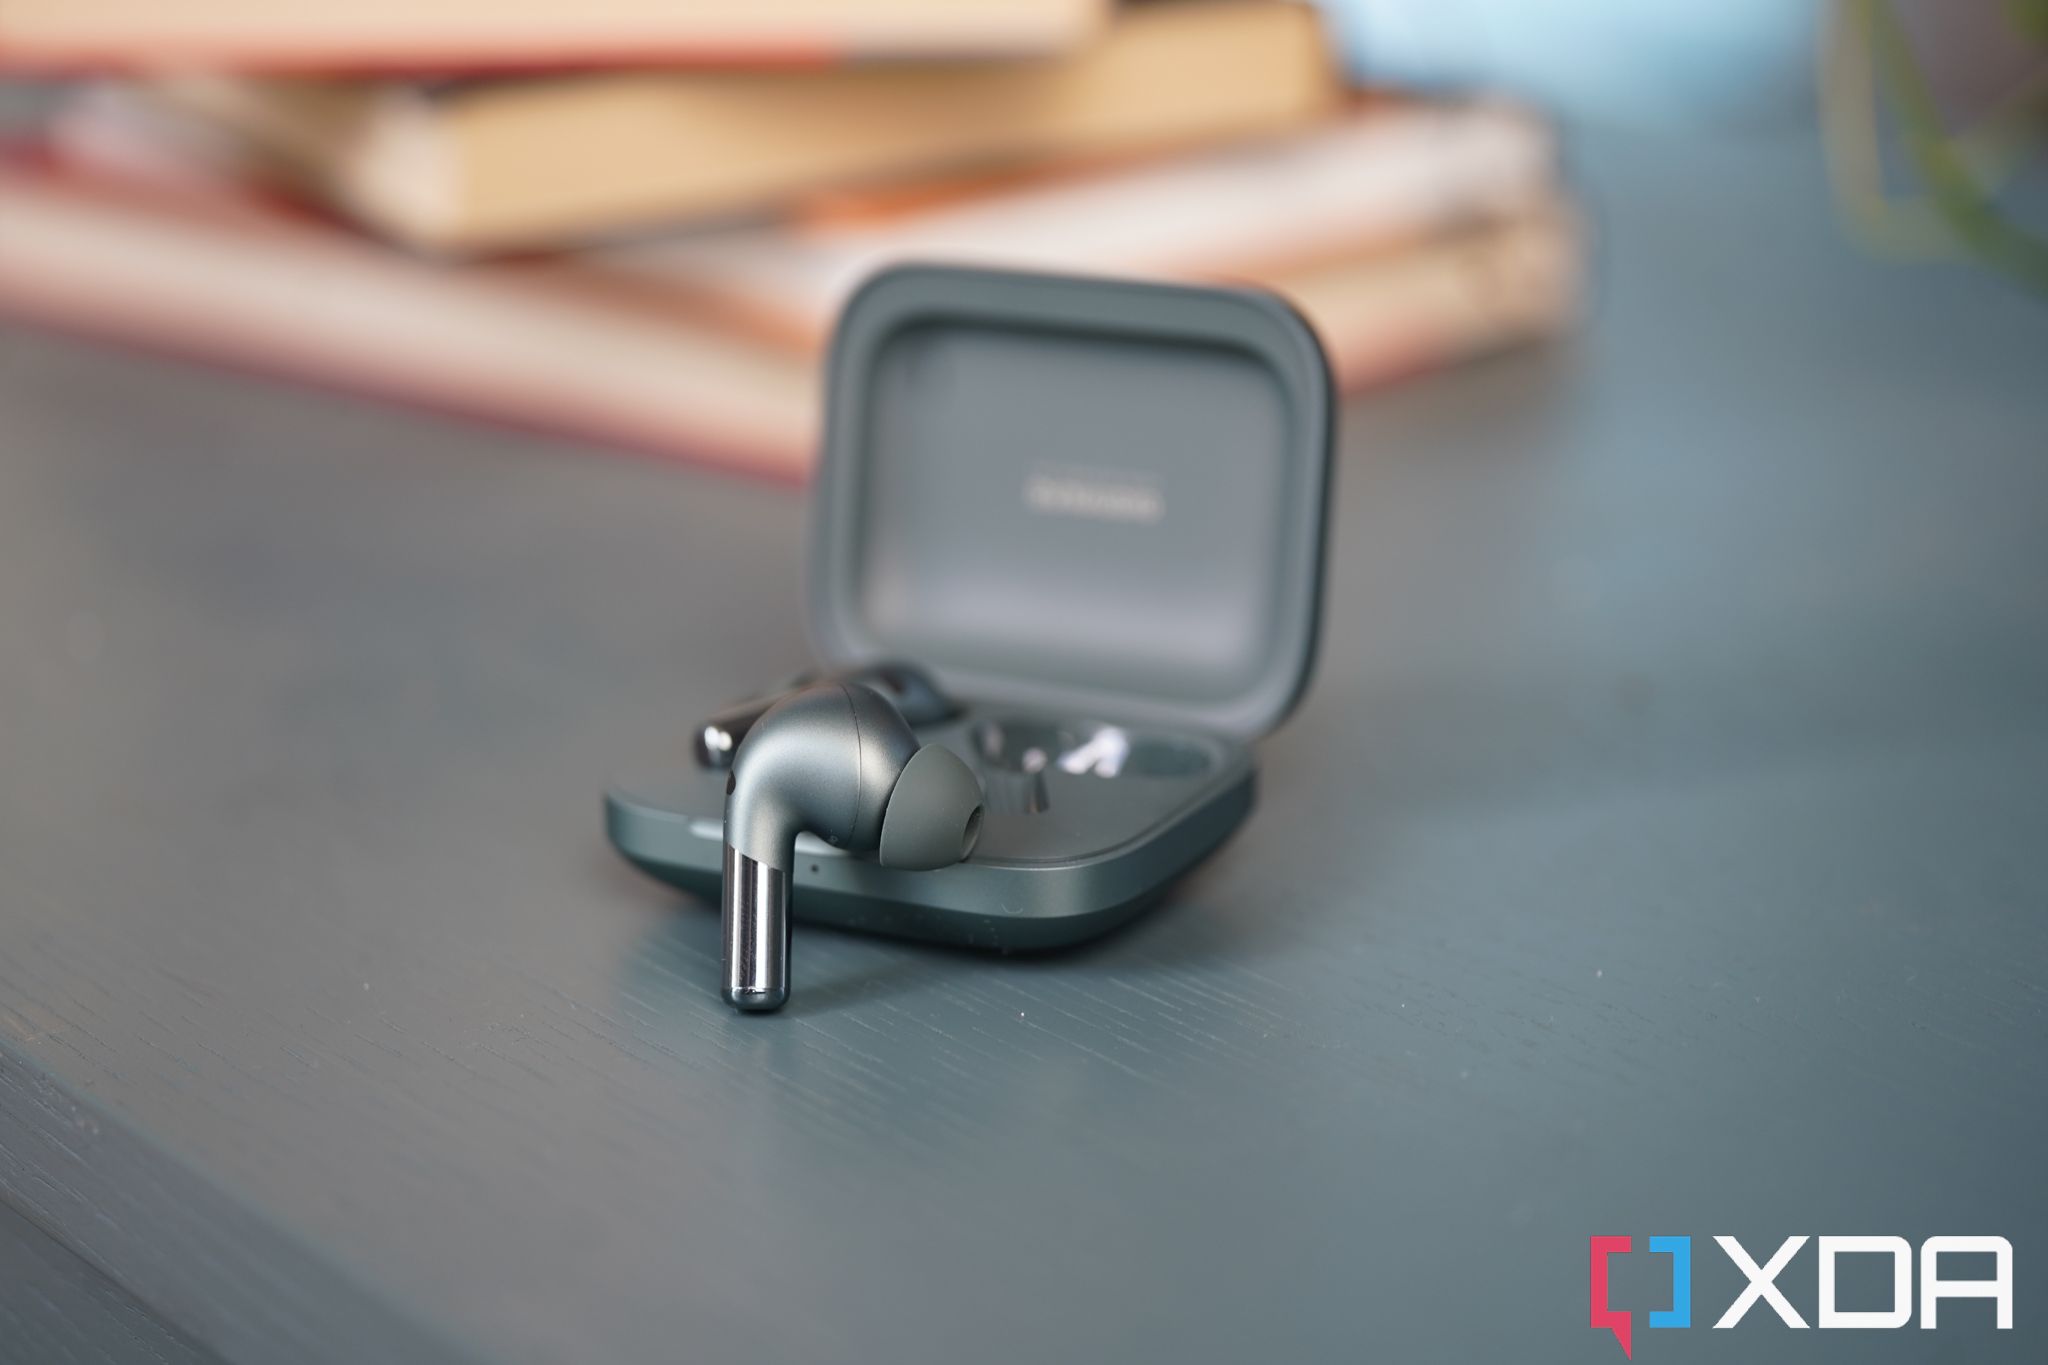 OnePlus Buds Pro 2 review: Great sound and looks, but lacking ANC